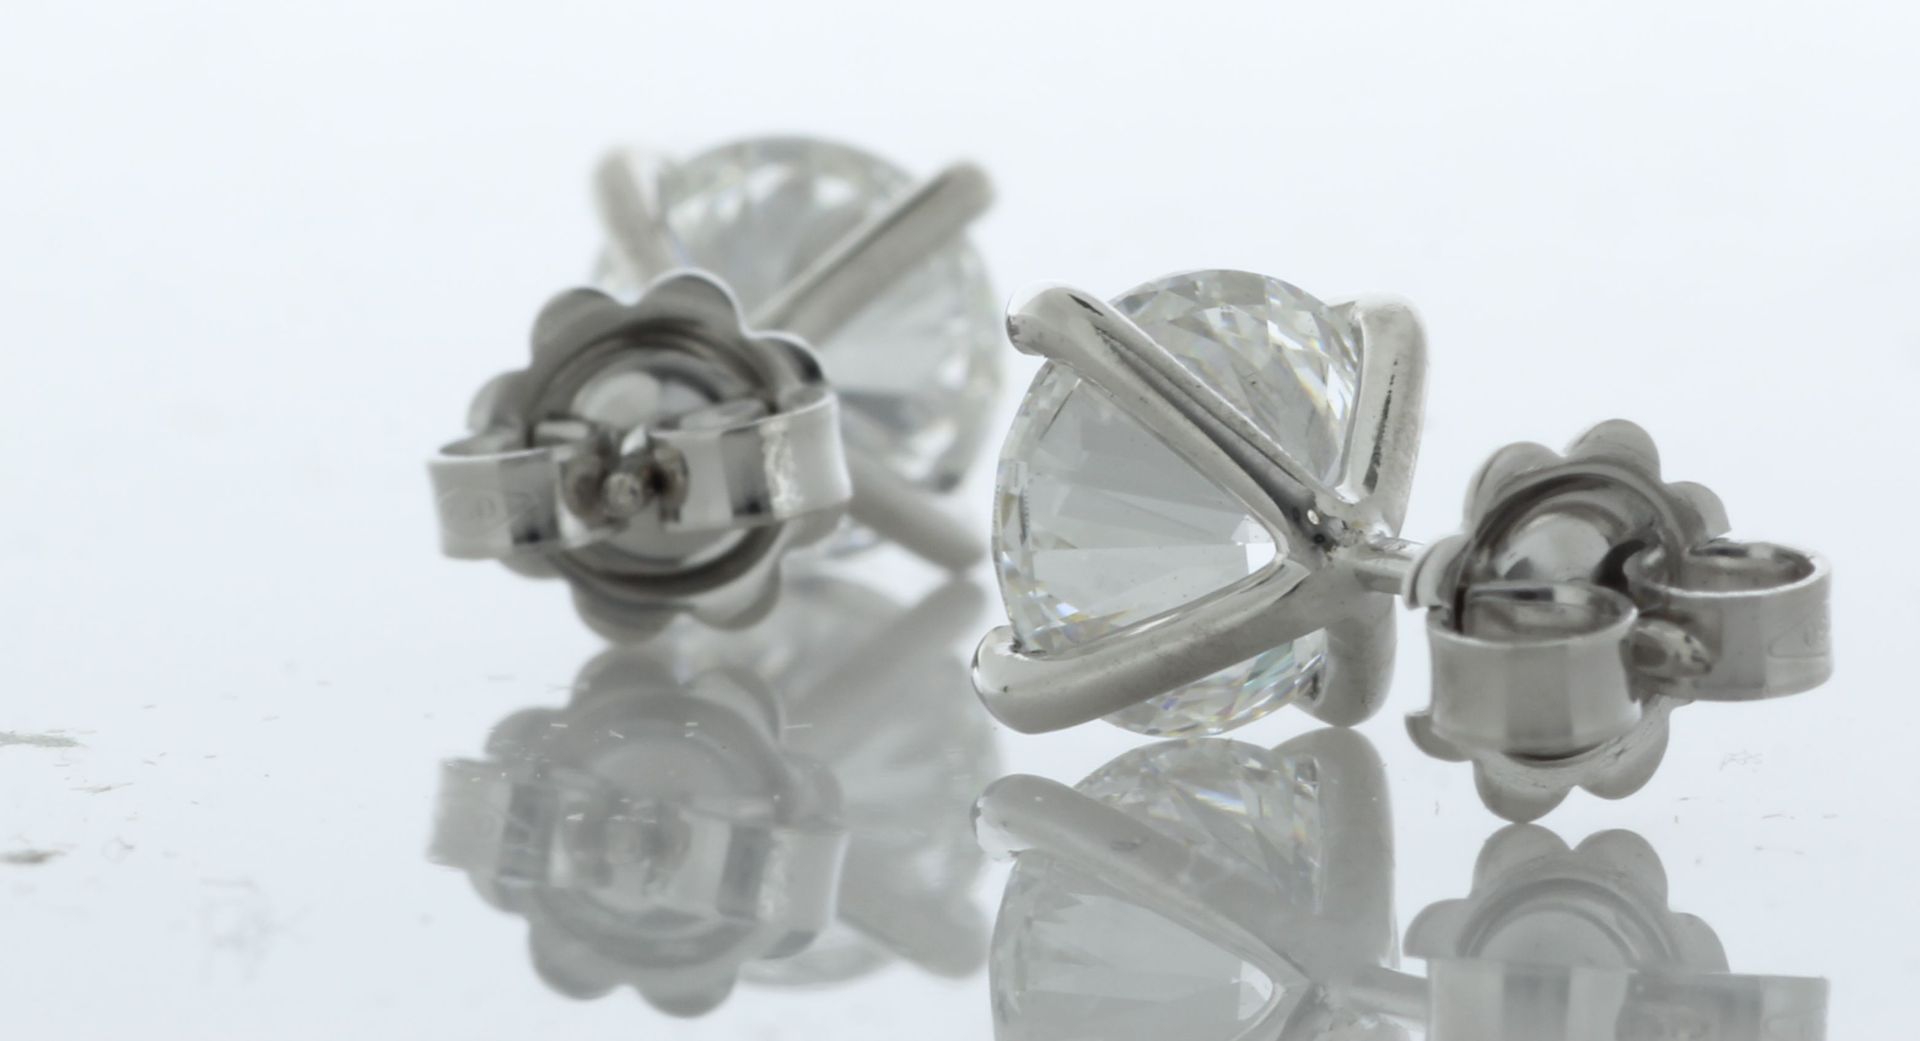 18ct White Gold LAB GROWN Diamond Earrings 4.05 Carats - Valued By IDI £47,600.00 - Two stunning - Image 3 of 4